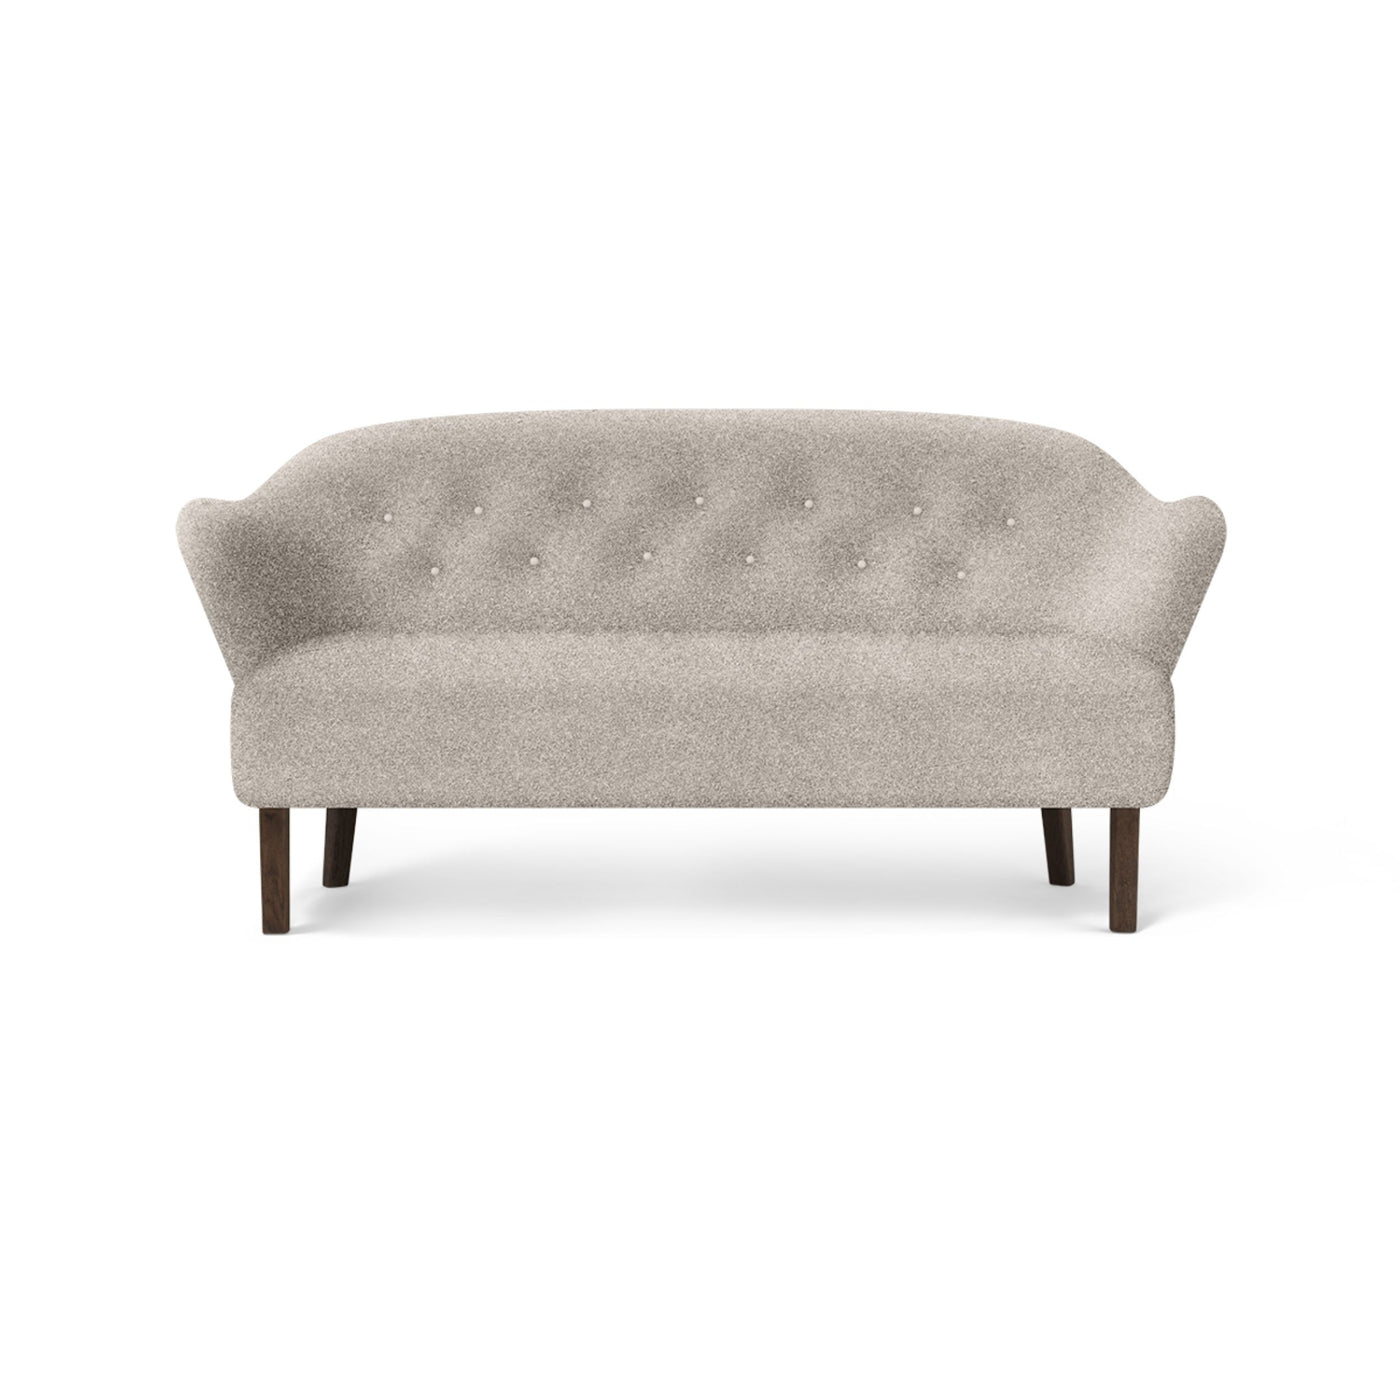 By Lassen Ingeborg sofa with smoked oak legs. Made to order from someday designs. #colour_sahco-nara-7